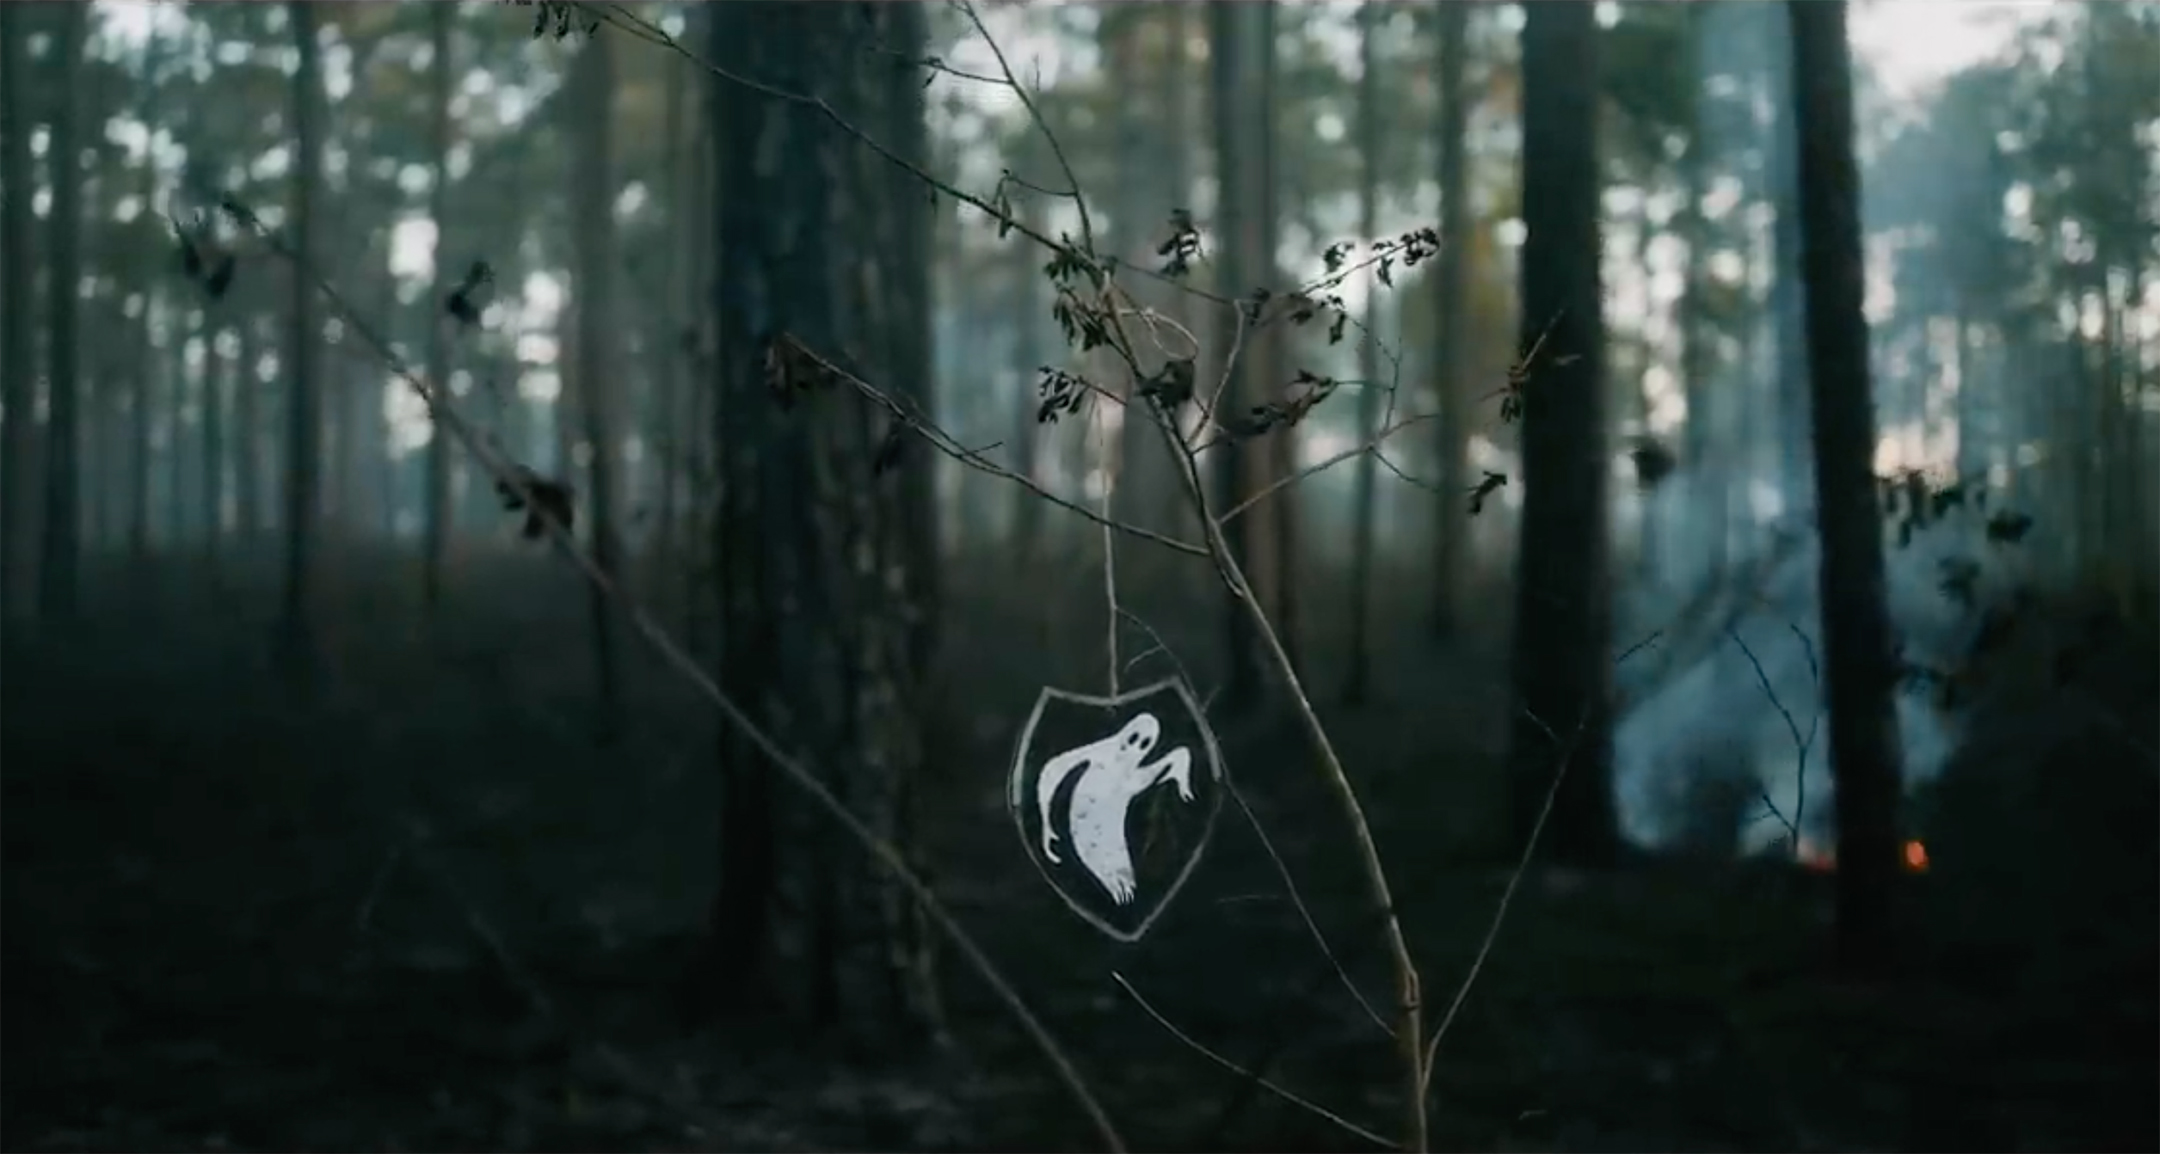 Screenshot from a video showing a ghost keychain hanging on a branch in a barren forest